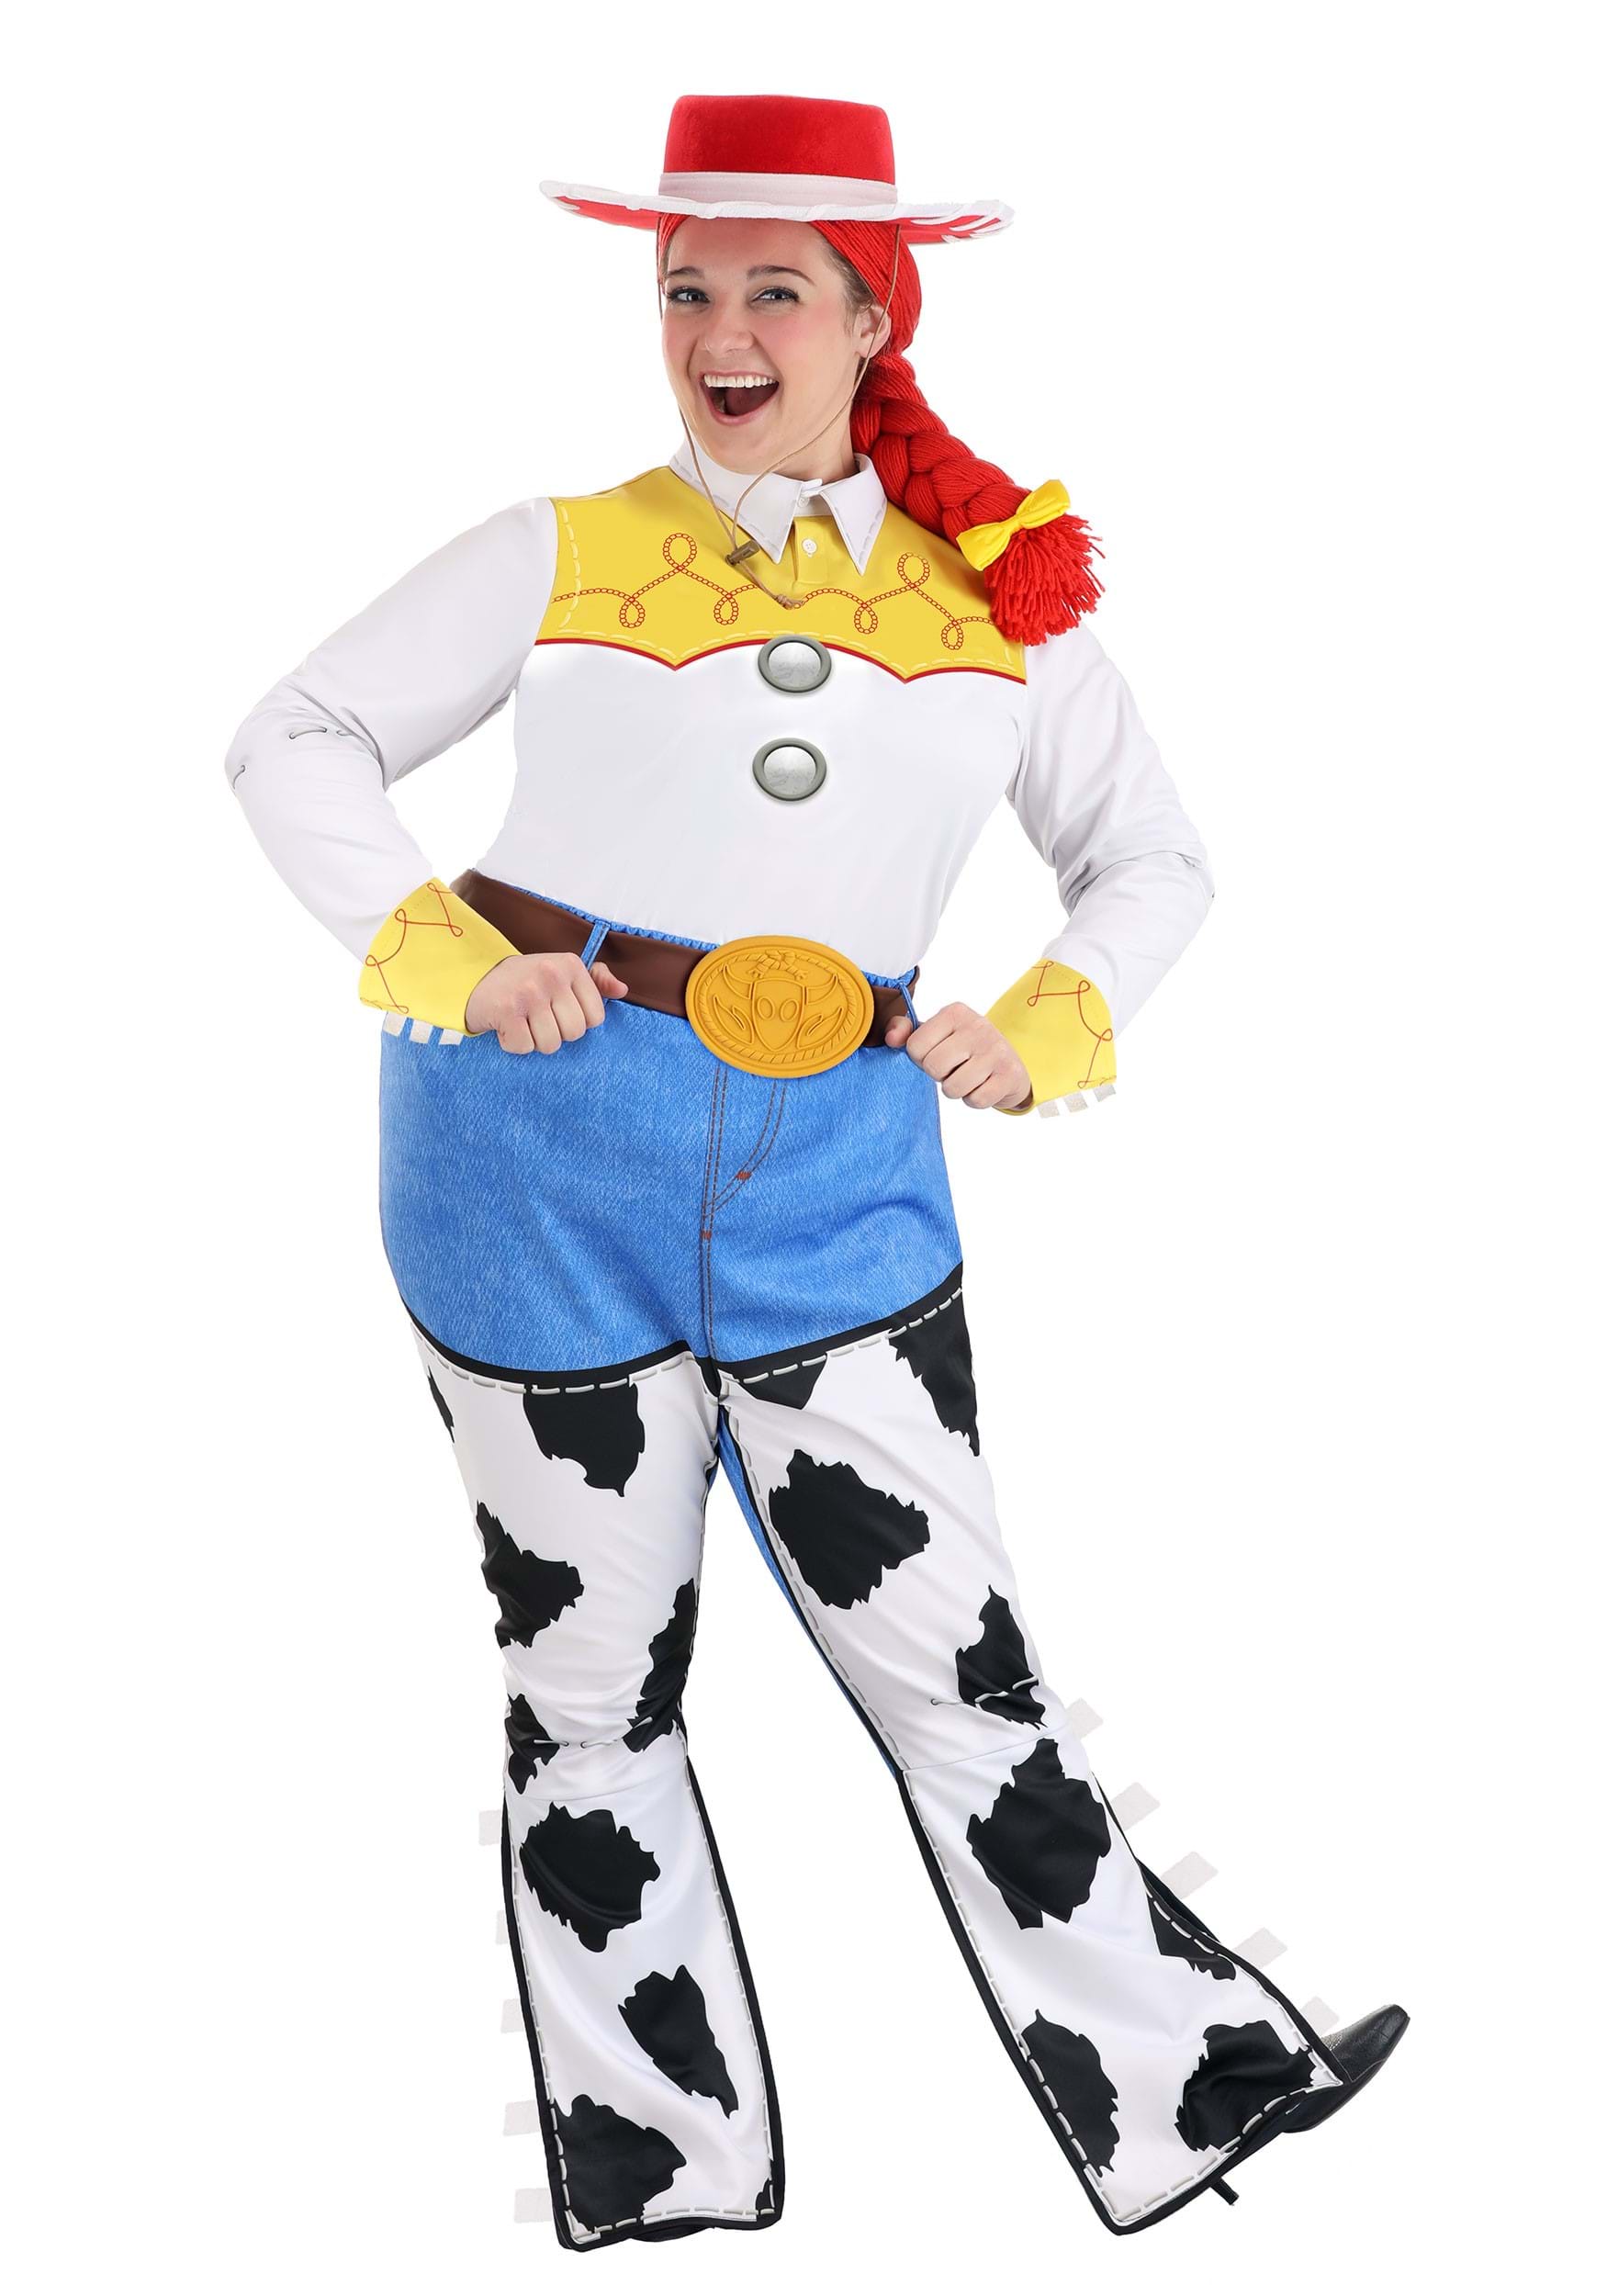 Photos - Fancy Dress Deluxe FUN Costumes Plus Size Women's  Jessie Toy Story Costume Blue/Wh 